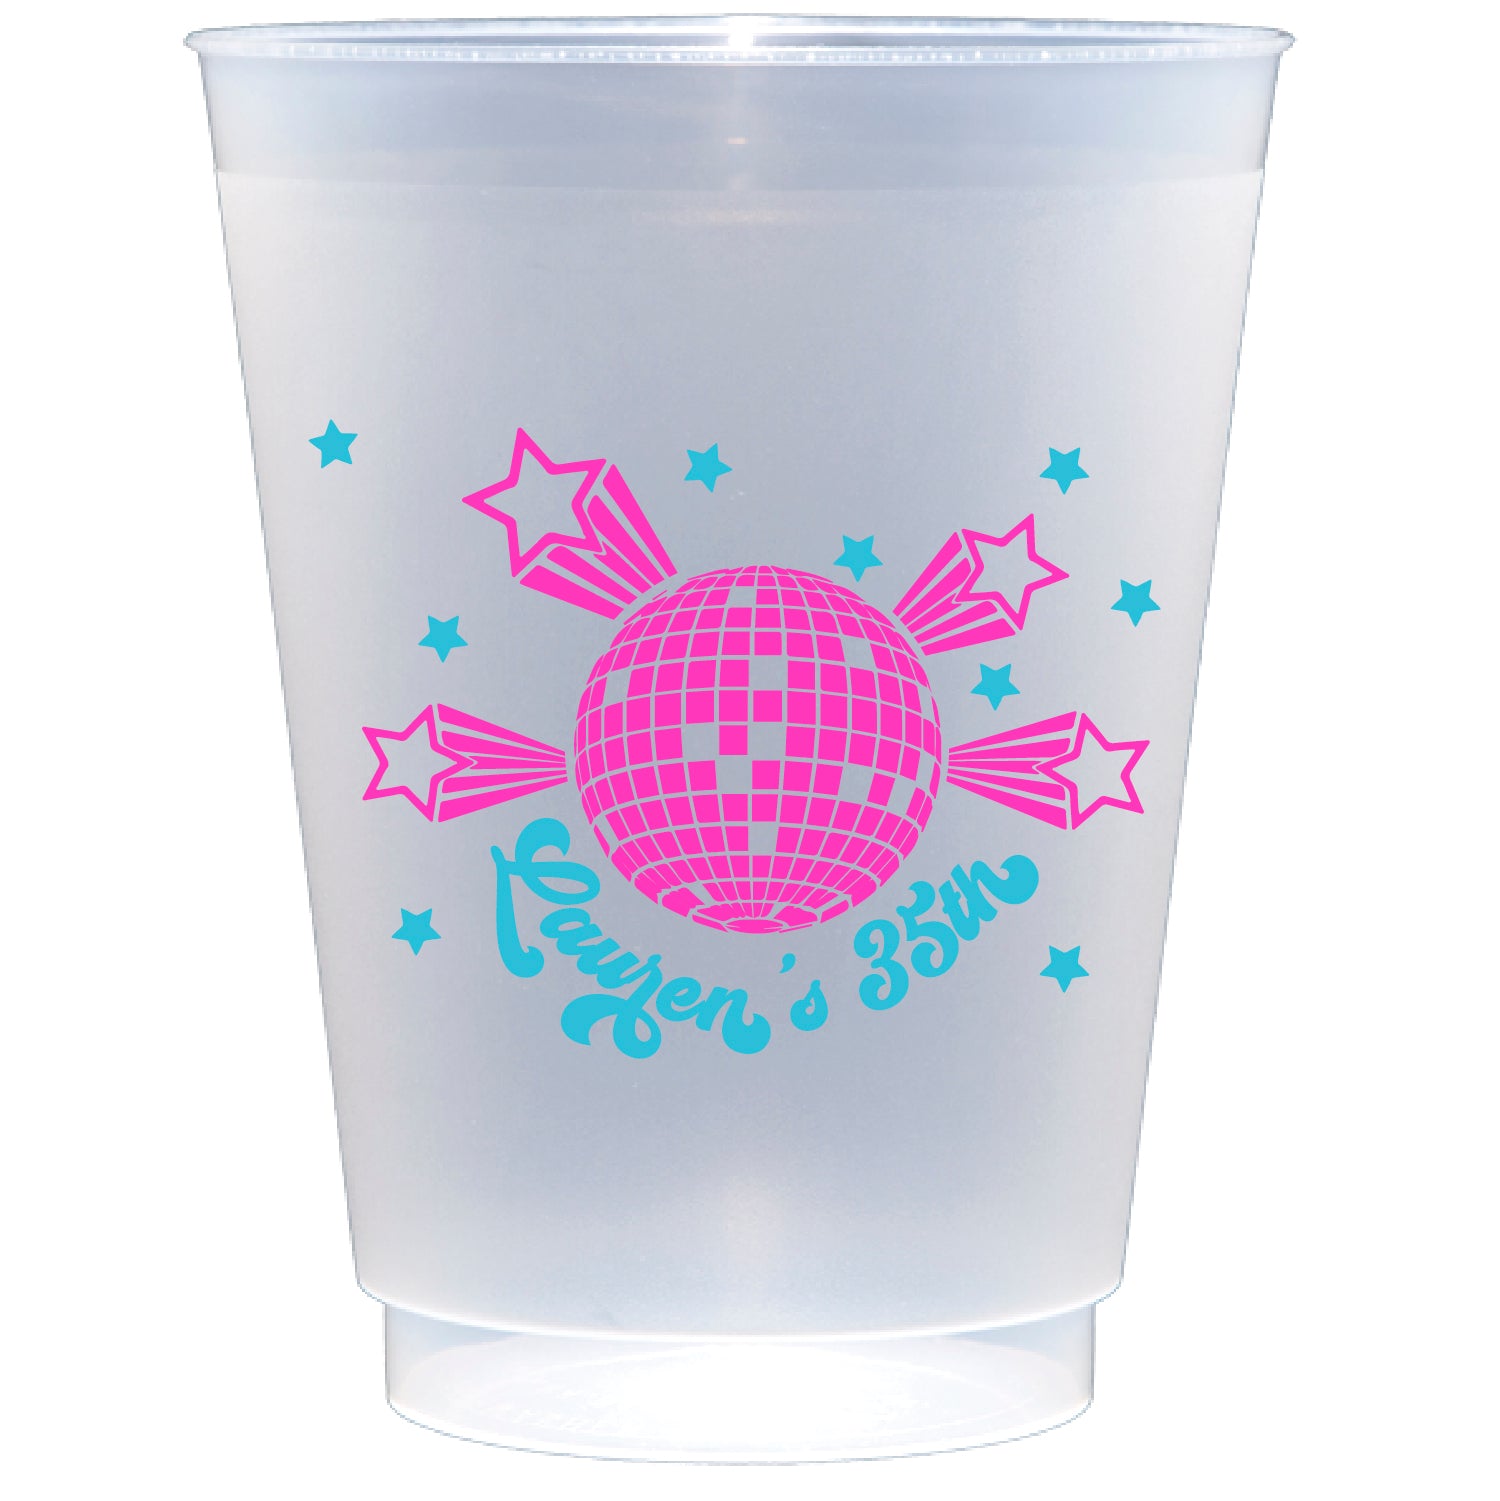 This item is unavailable -   Plastic party cups, Shatterproof